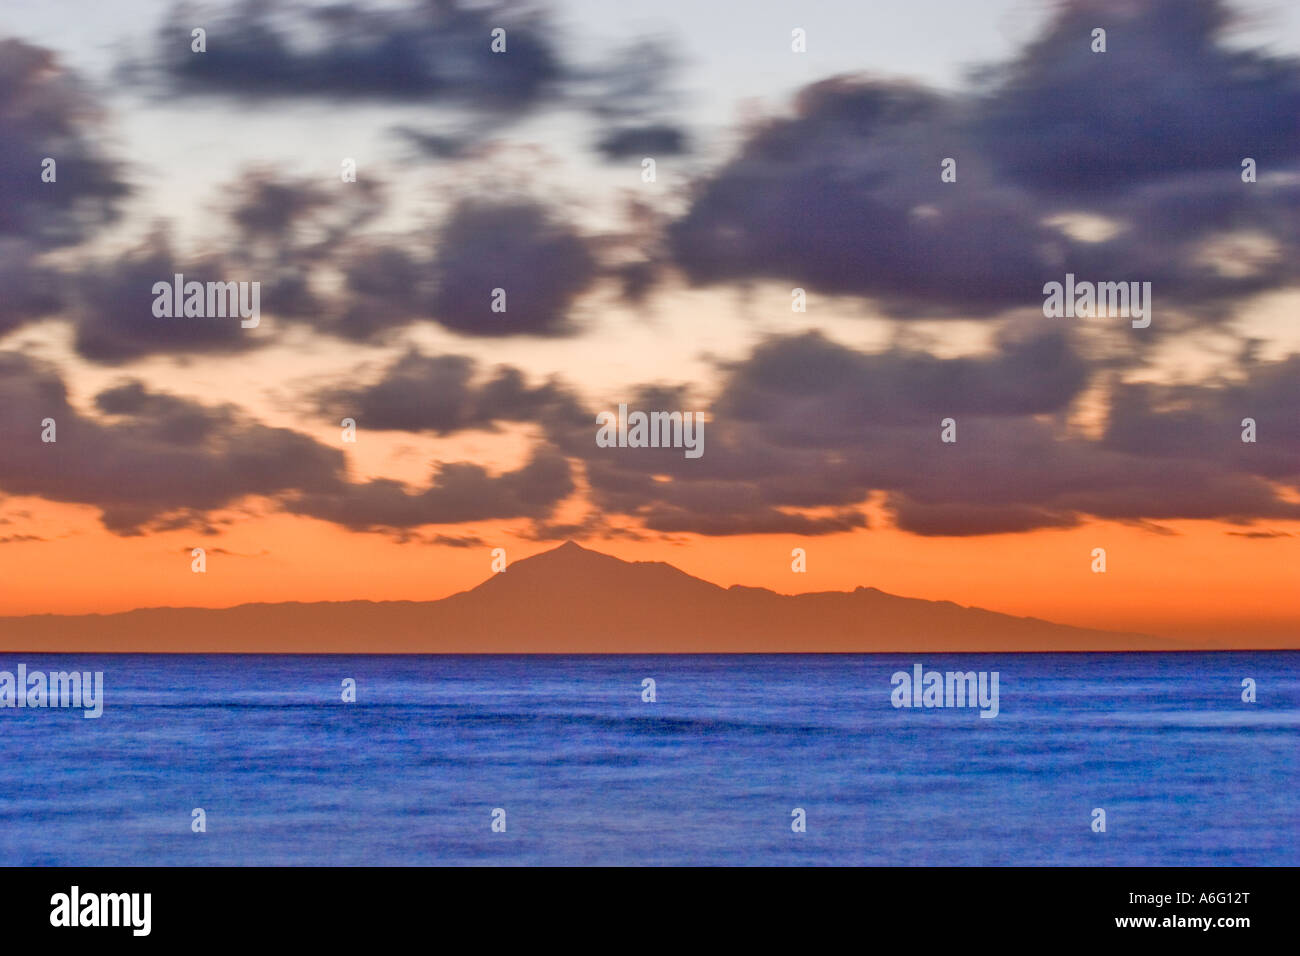 Mount Pico de Teide on Tenerife seen from La Palma in the morning with rising sun new RAW conversion Stock Photo